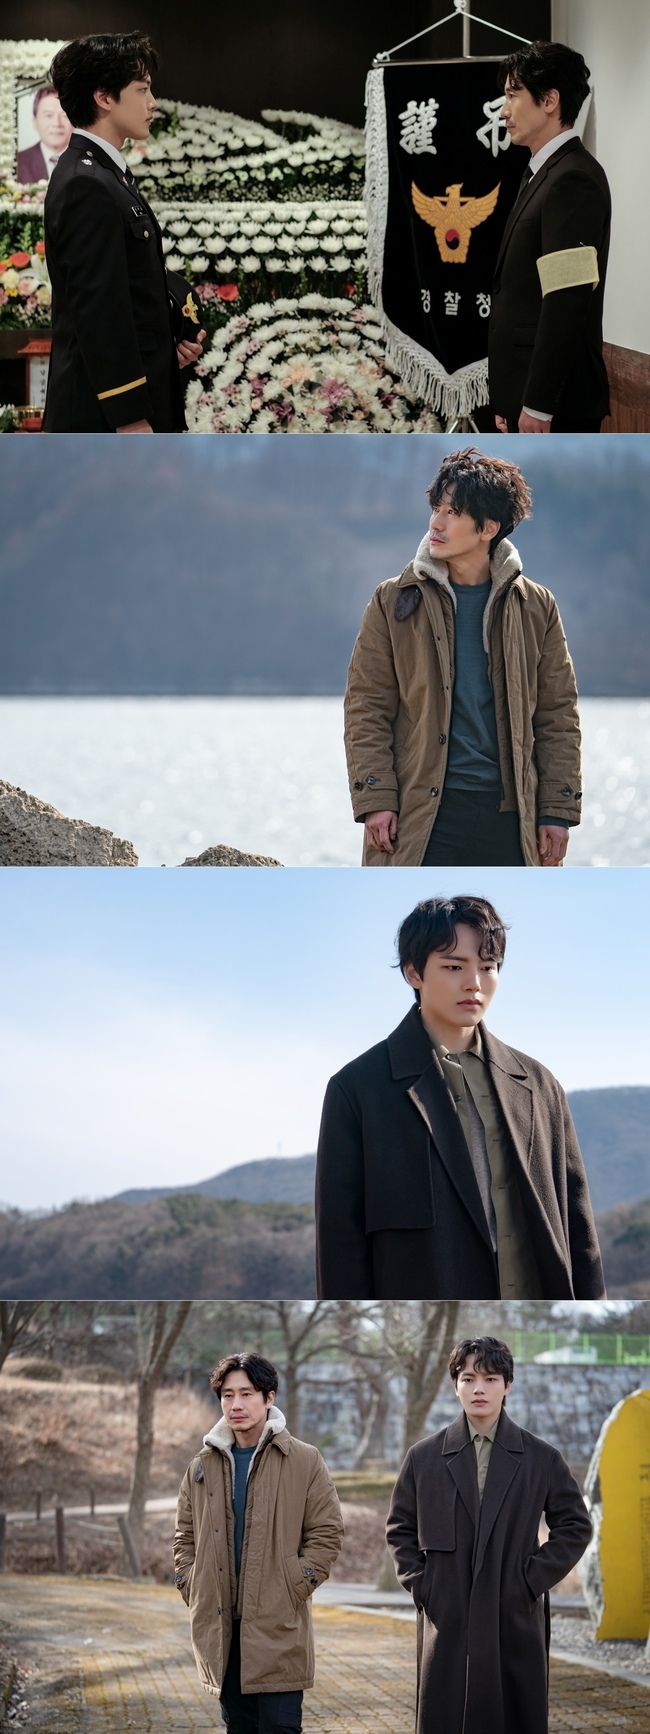 Shin Ha-kyun, Yeo Jin-goo rewrite the edition.JTBCs Golden Monster (played by Kim Soo-jin/directed by Shim Na-yeon) unveiled a resolute and hot exchange of eyes between Move-style (Shin Ha-kyun) and One (Yeo Jin-goo) on March 25.The two men who shared the same pain with the death of Nam Sang-bae (Chun Ho-jin), and those who have met the decisive turning point, are attracting attention.In the last broadcast, Nam Sang-bae was also questioned after serial killer Kang Jin-mook (Lee Kyu-hoe).Movesik and One, who could not prevent his death, collapsed desperately, and the truth sank back into deep darkness.Who is Monster, who is hiding among people who want to hide the truth? The reasoning of viewers is being fully activated in the second round of unfinished truth tracking.In the meantime, the different atmosphere of the Move-style and One-week-long face in the funeral in the public photos raises questions.The perilous appearance of the Move-style, who found the lake alone, was also captured: the Move-style, looking somewhere with a mixture of sadness and pain.His face is complicated as he stares at Movesik. Two people are heading somewhere in the ensuing photo.The cold face heralds an unusual change that has come to them.In the 11th broadcast on the 26th, One suggests Confidential Assignment to Move.Two men who have run to break the law and one rule to catch Monster, are paying attention to whether they will become Monster again to end the ongoing tragedy.